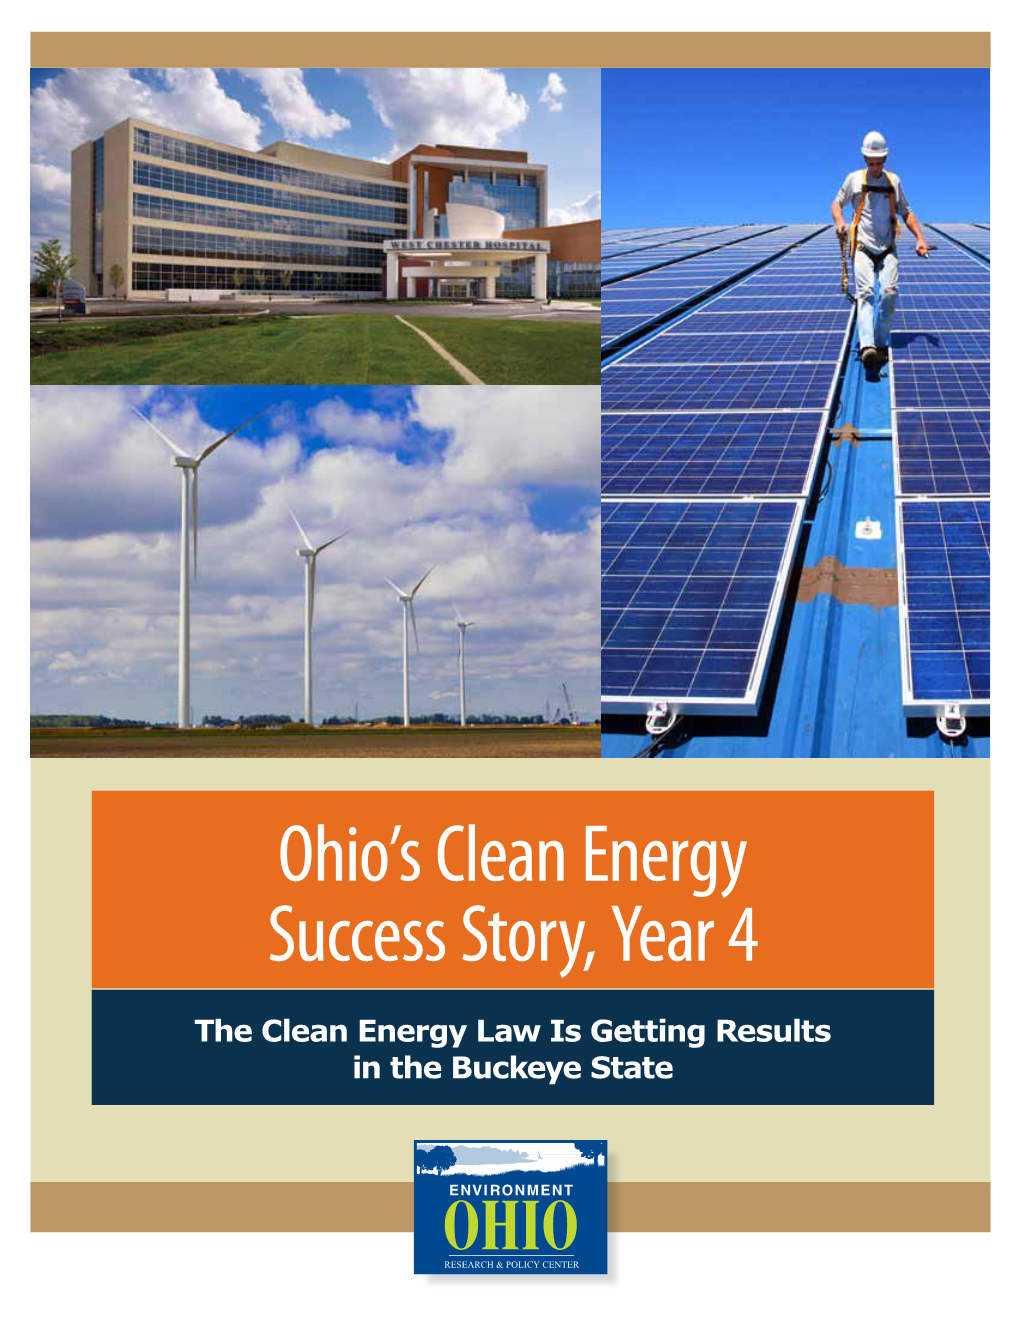 Ohio's Clean Energy Success Story, Year 4